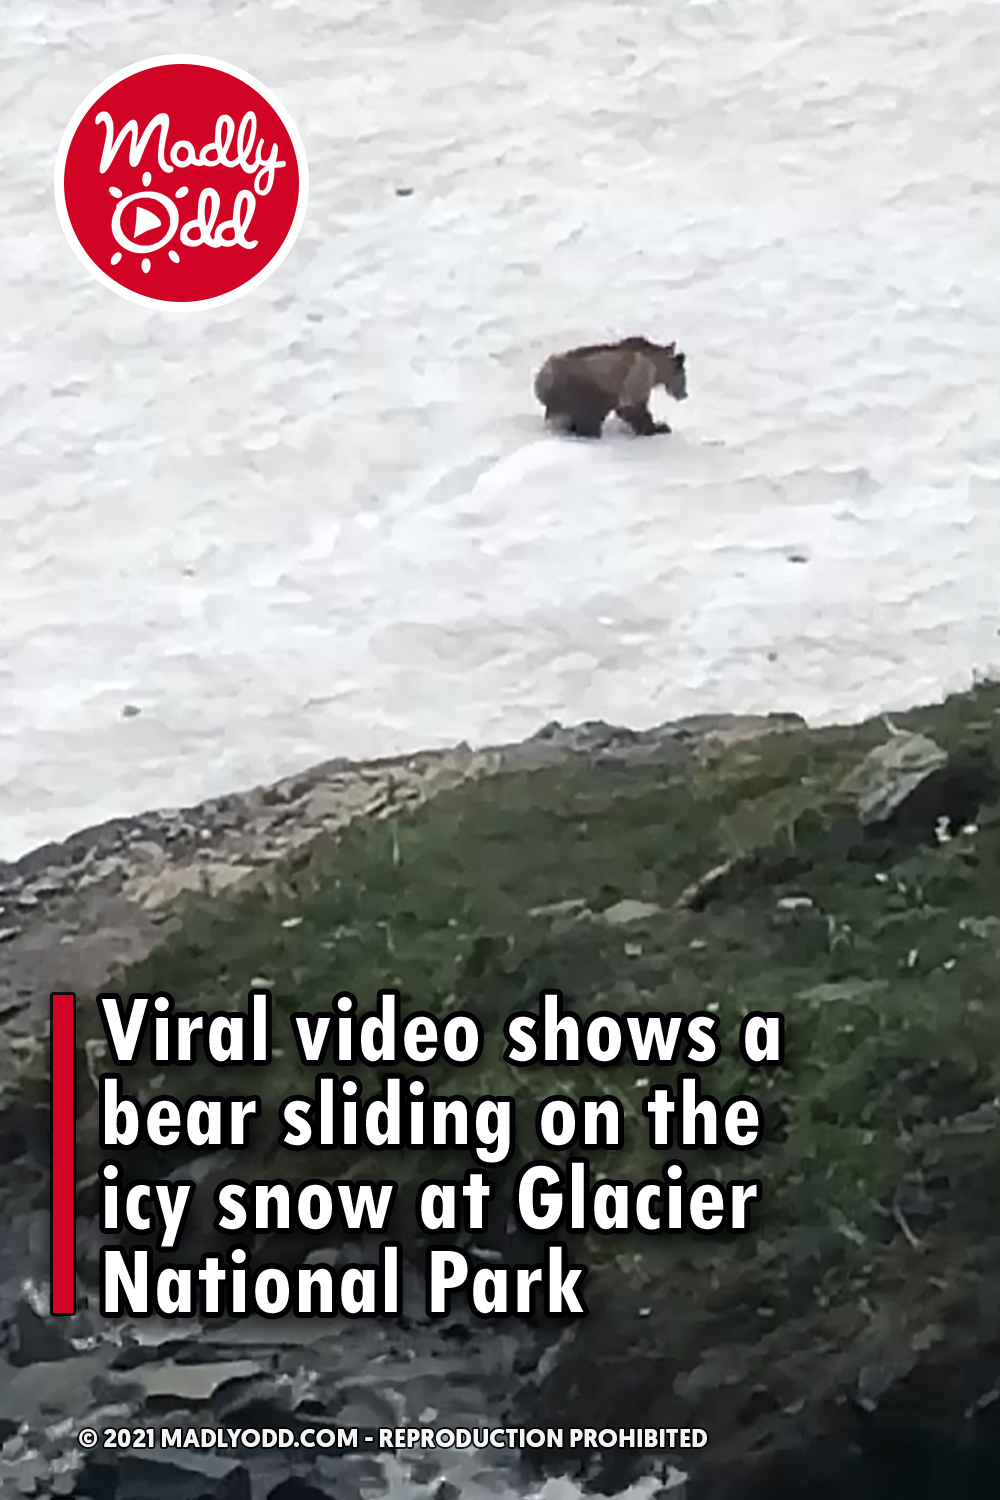 Viral video shows a bear sliding on the icy snow at Glacier National Park